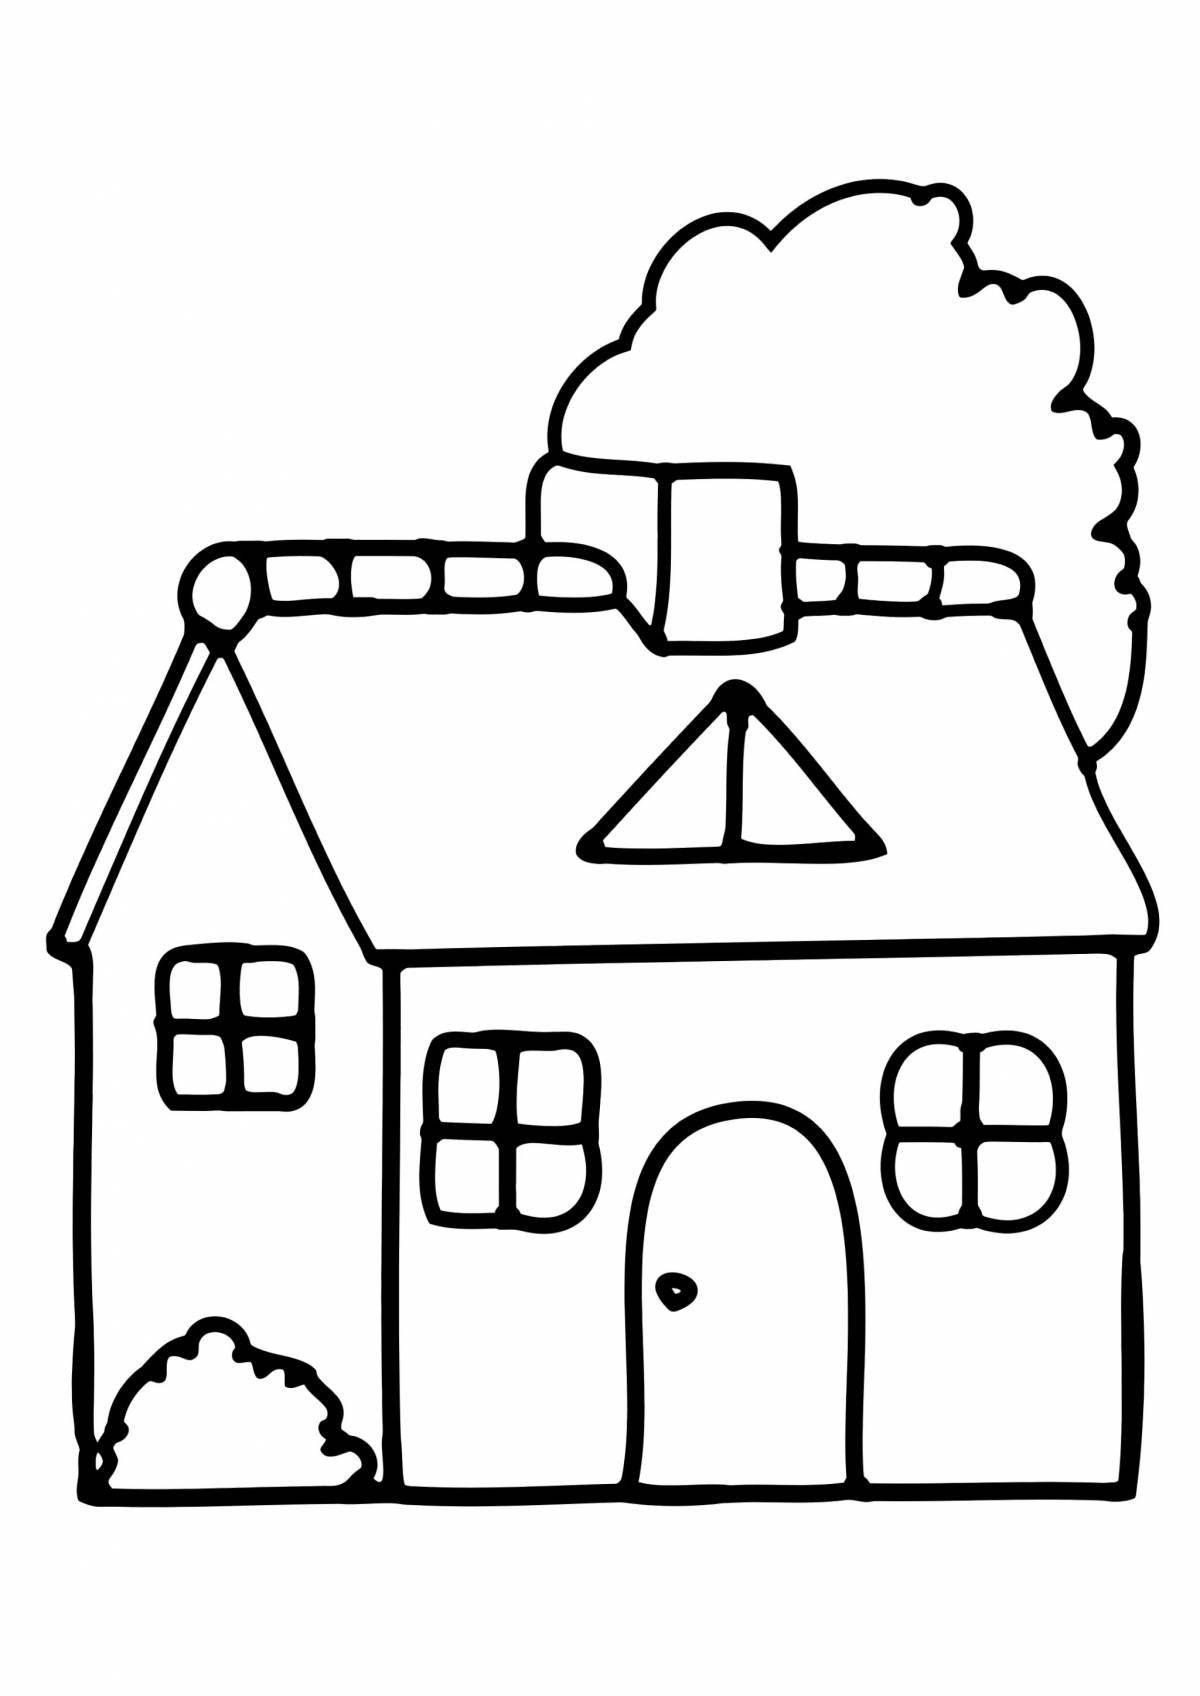 Shiny house coloring for kids